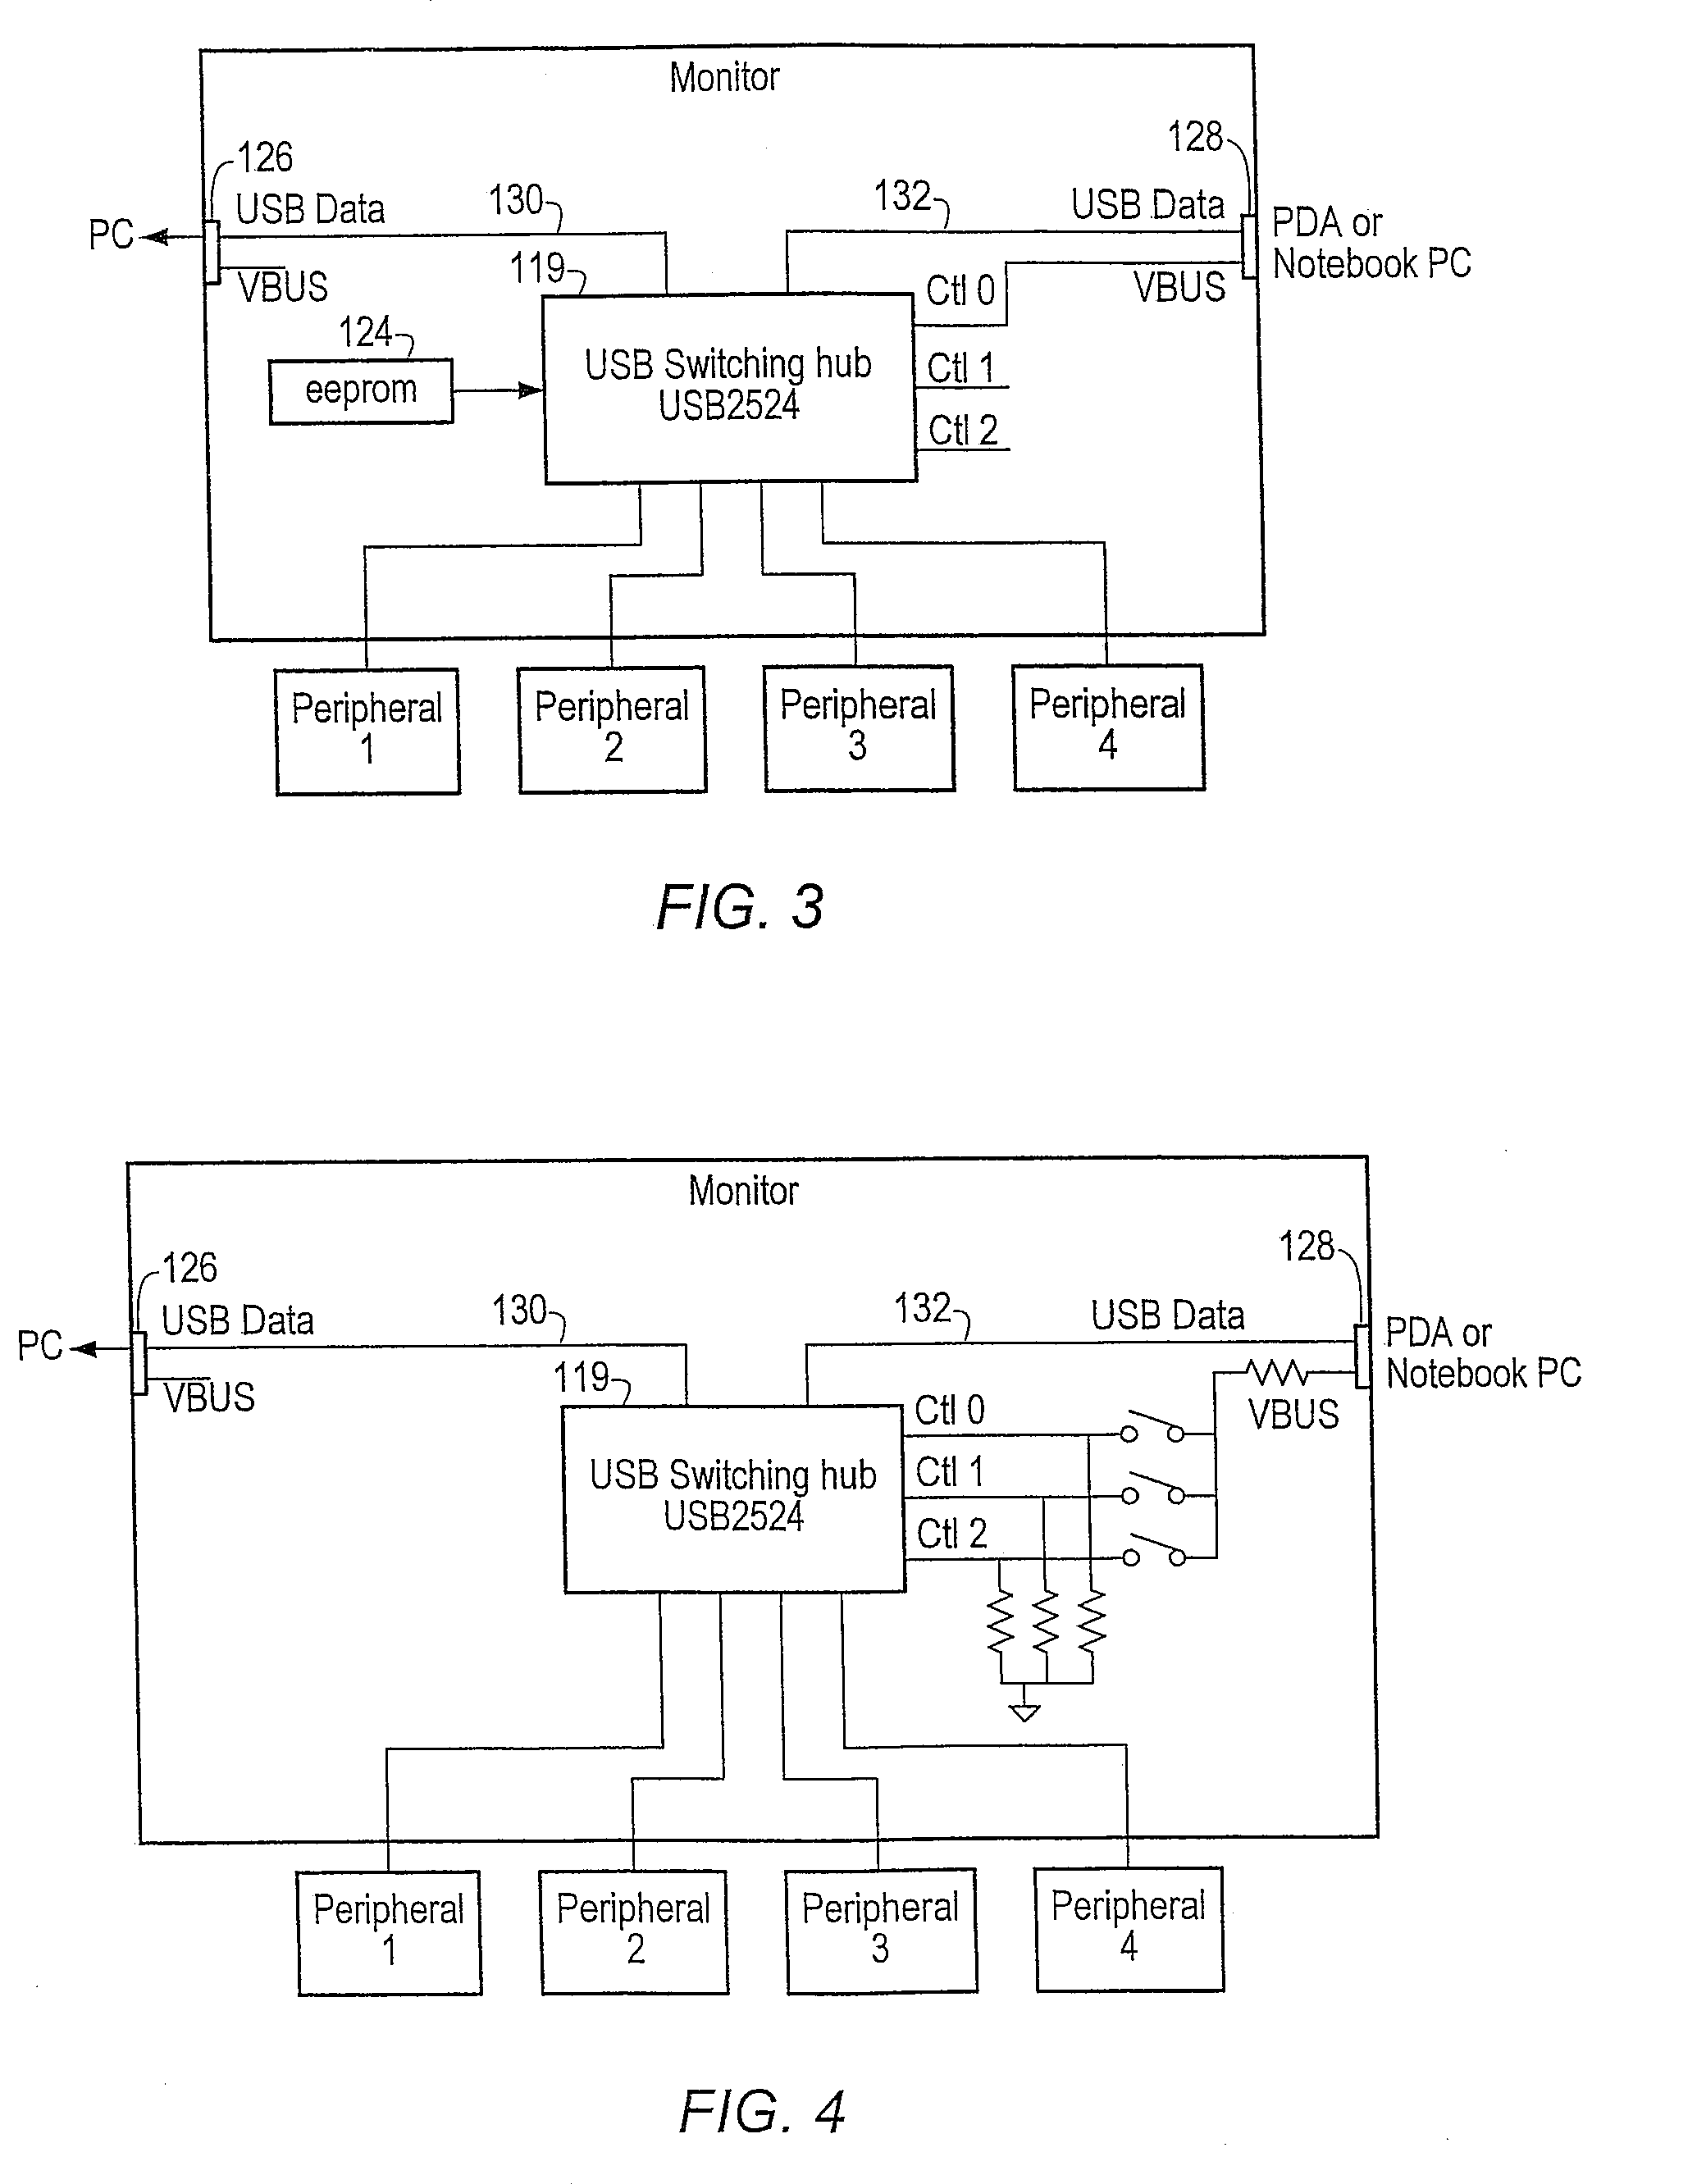 Method for automatically switching USB peripherals between USB hosts